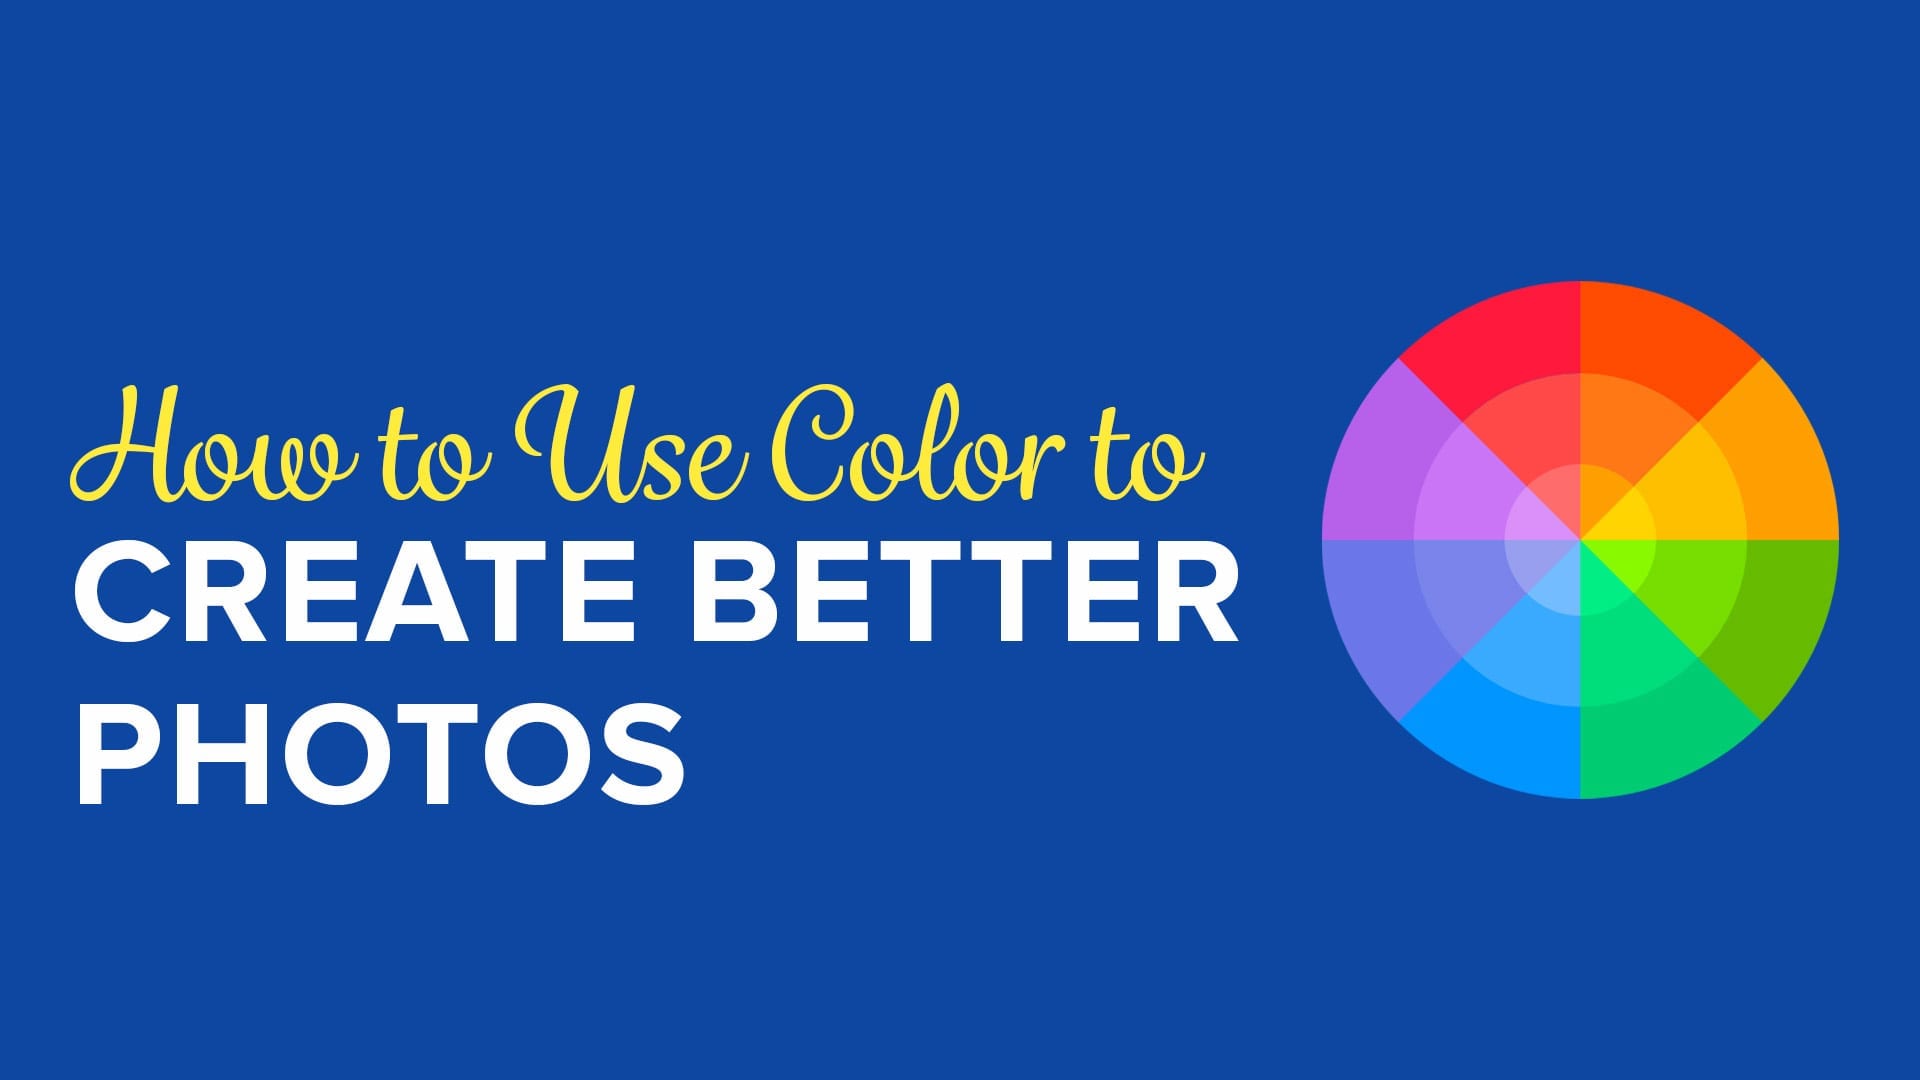 How to Use Color to Create Better Photos